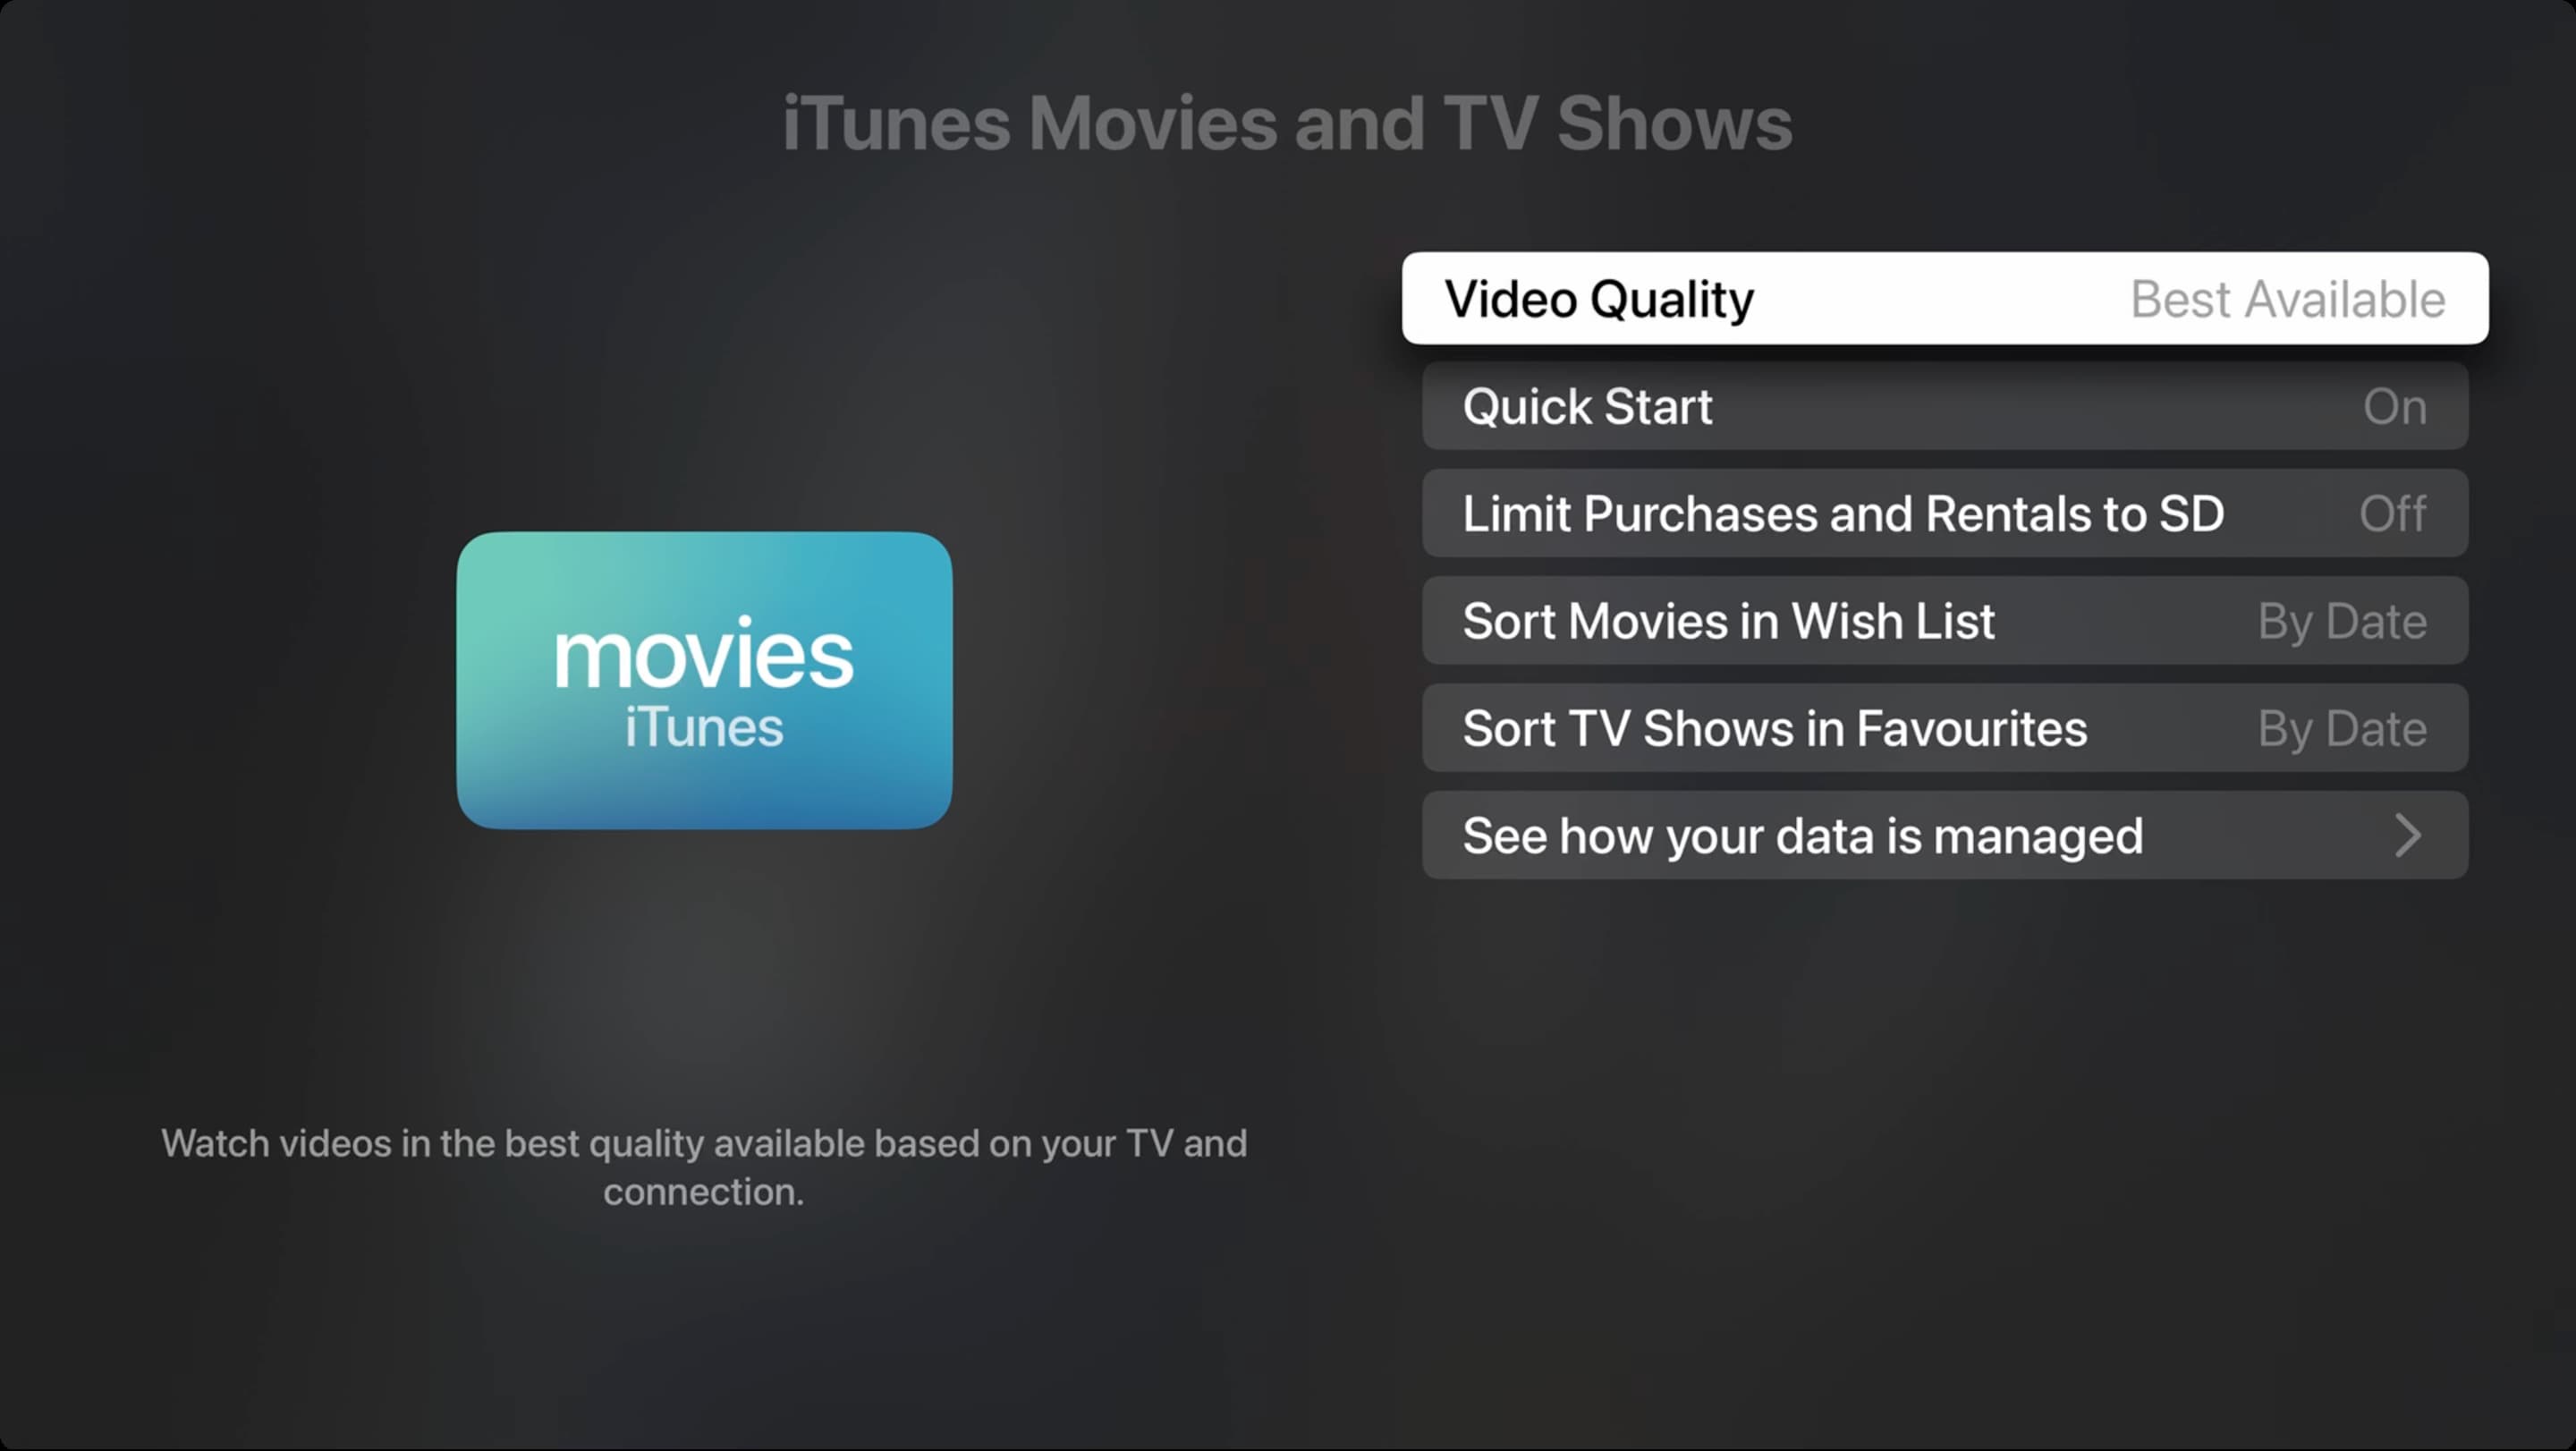 iTunes Movies and TV shows settings on Apple TV